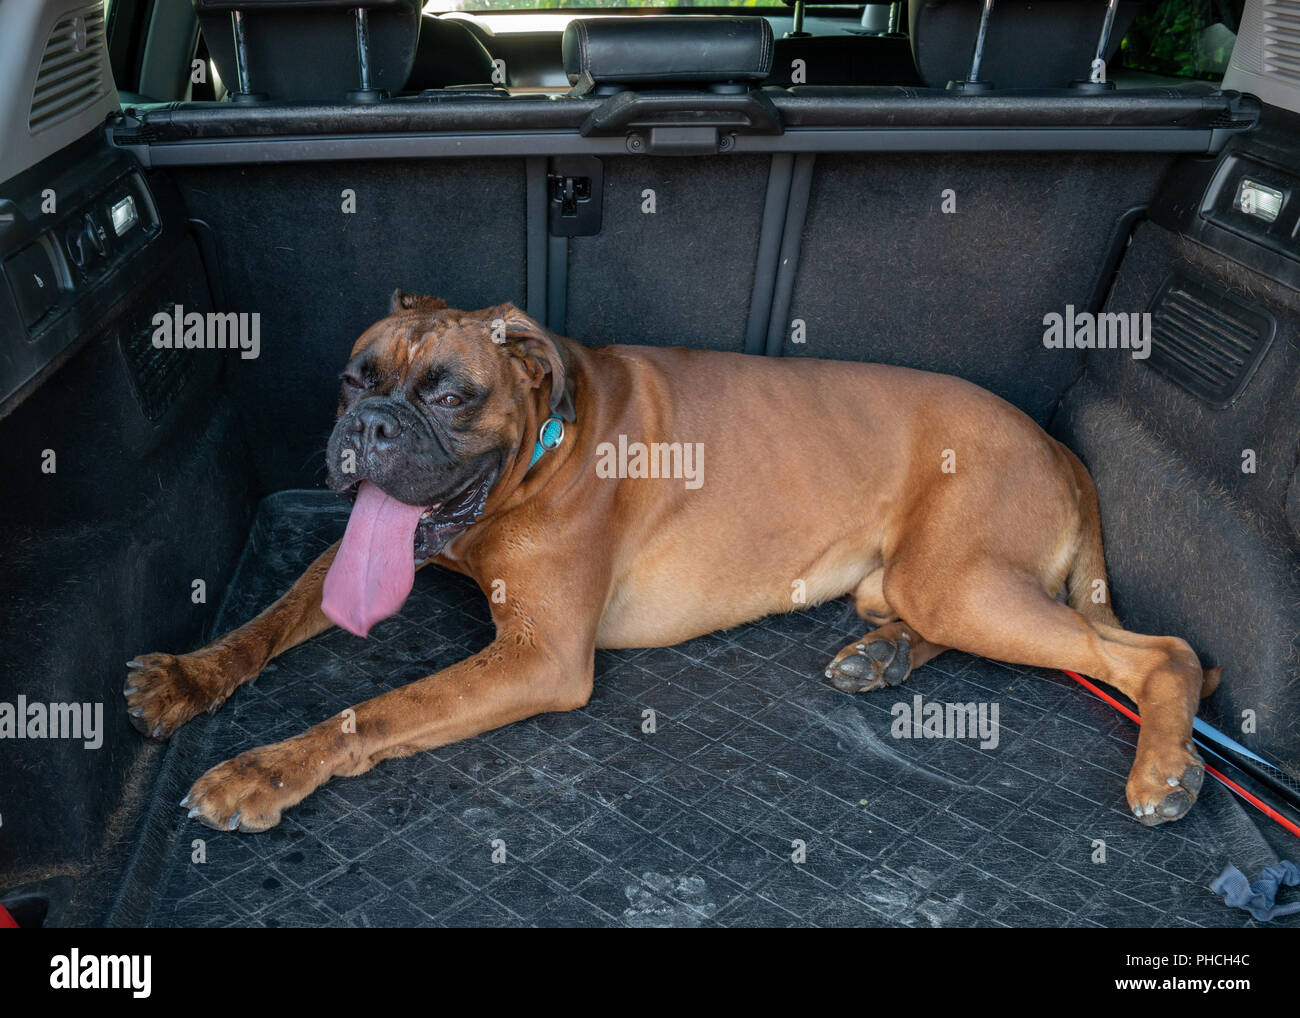 https://c8.alamy.com/comp/PHCH4C/trieste-italy-19-august-2018-a-boxer-dog-german-boxer-rests-in-a-car-trunk-after-a-training-session-photo-by-enrique-shore-PHCH4C.jpg